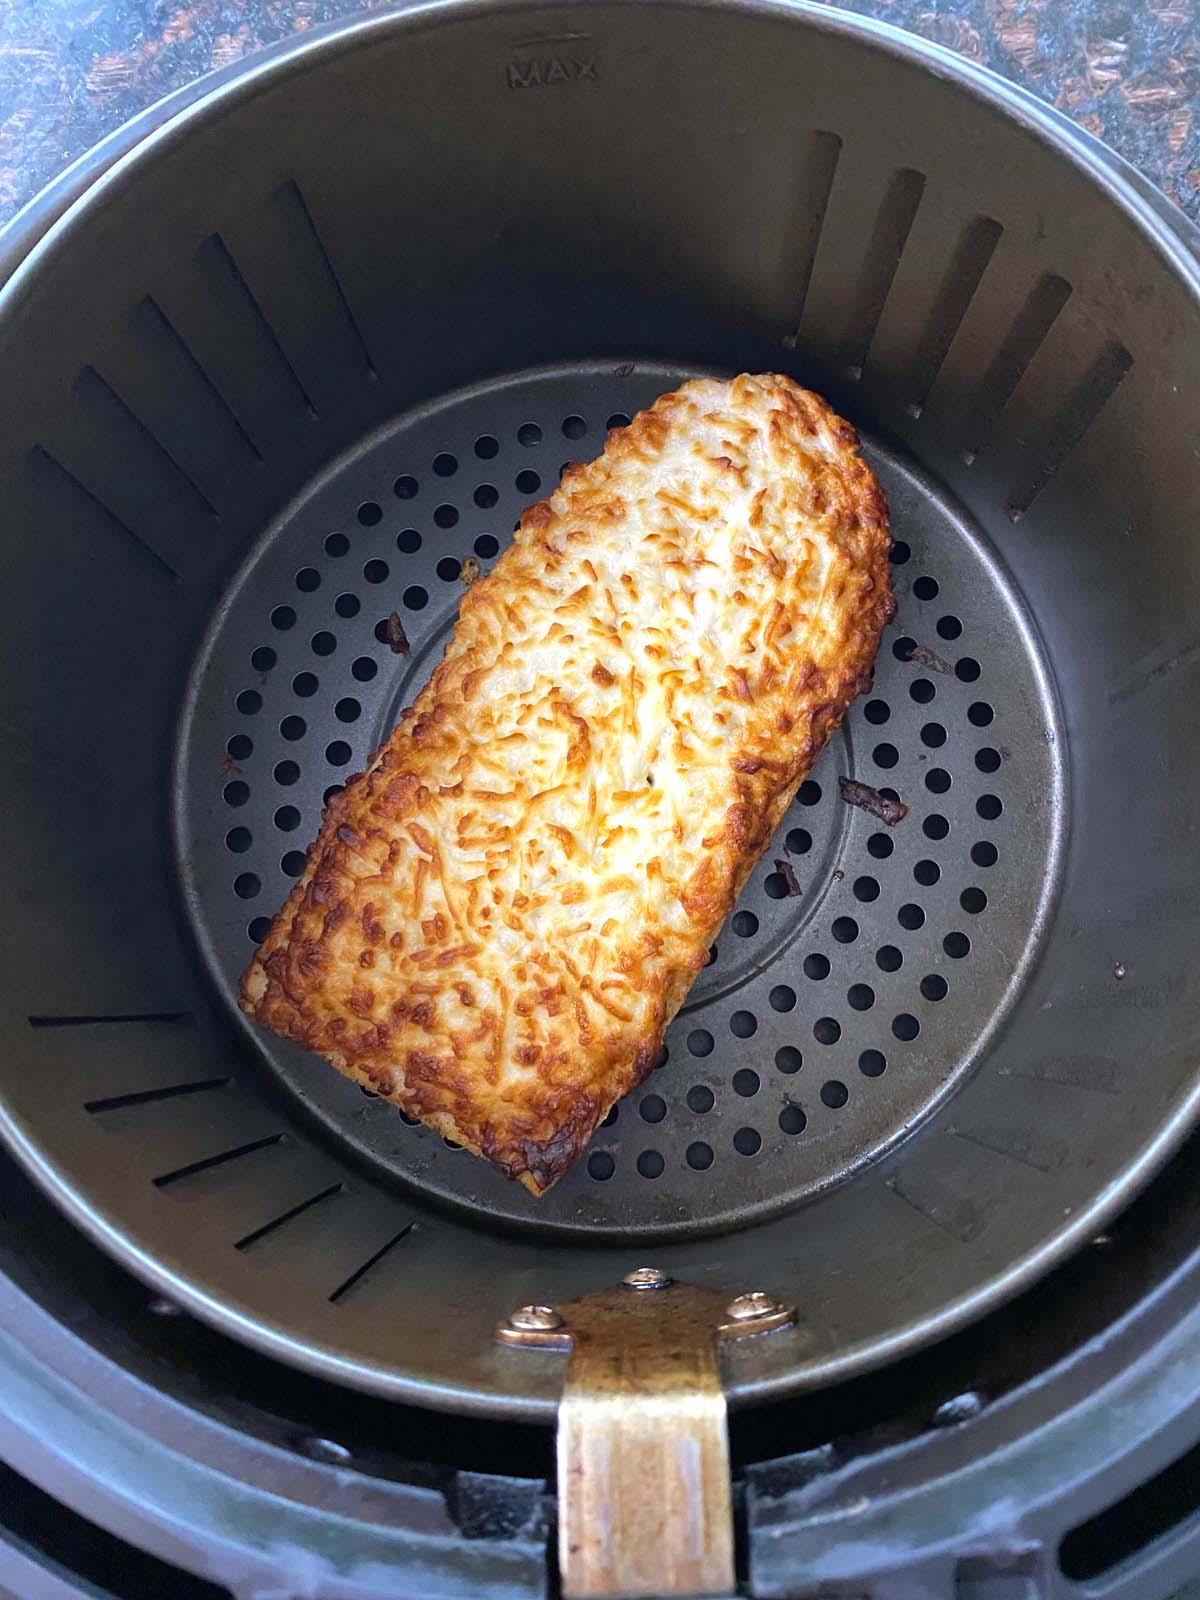 Cooked French bread pizza in an air fryer.